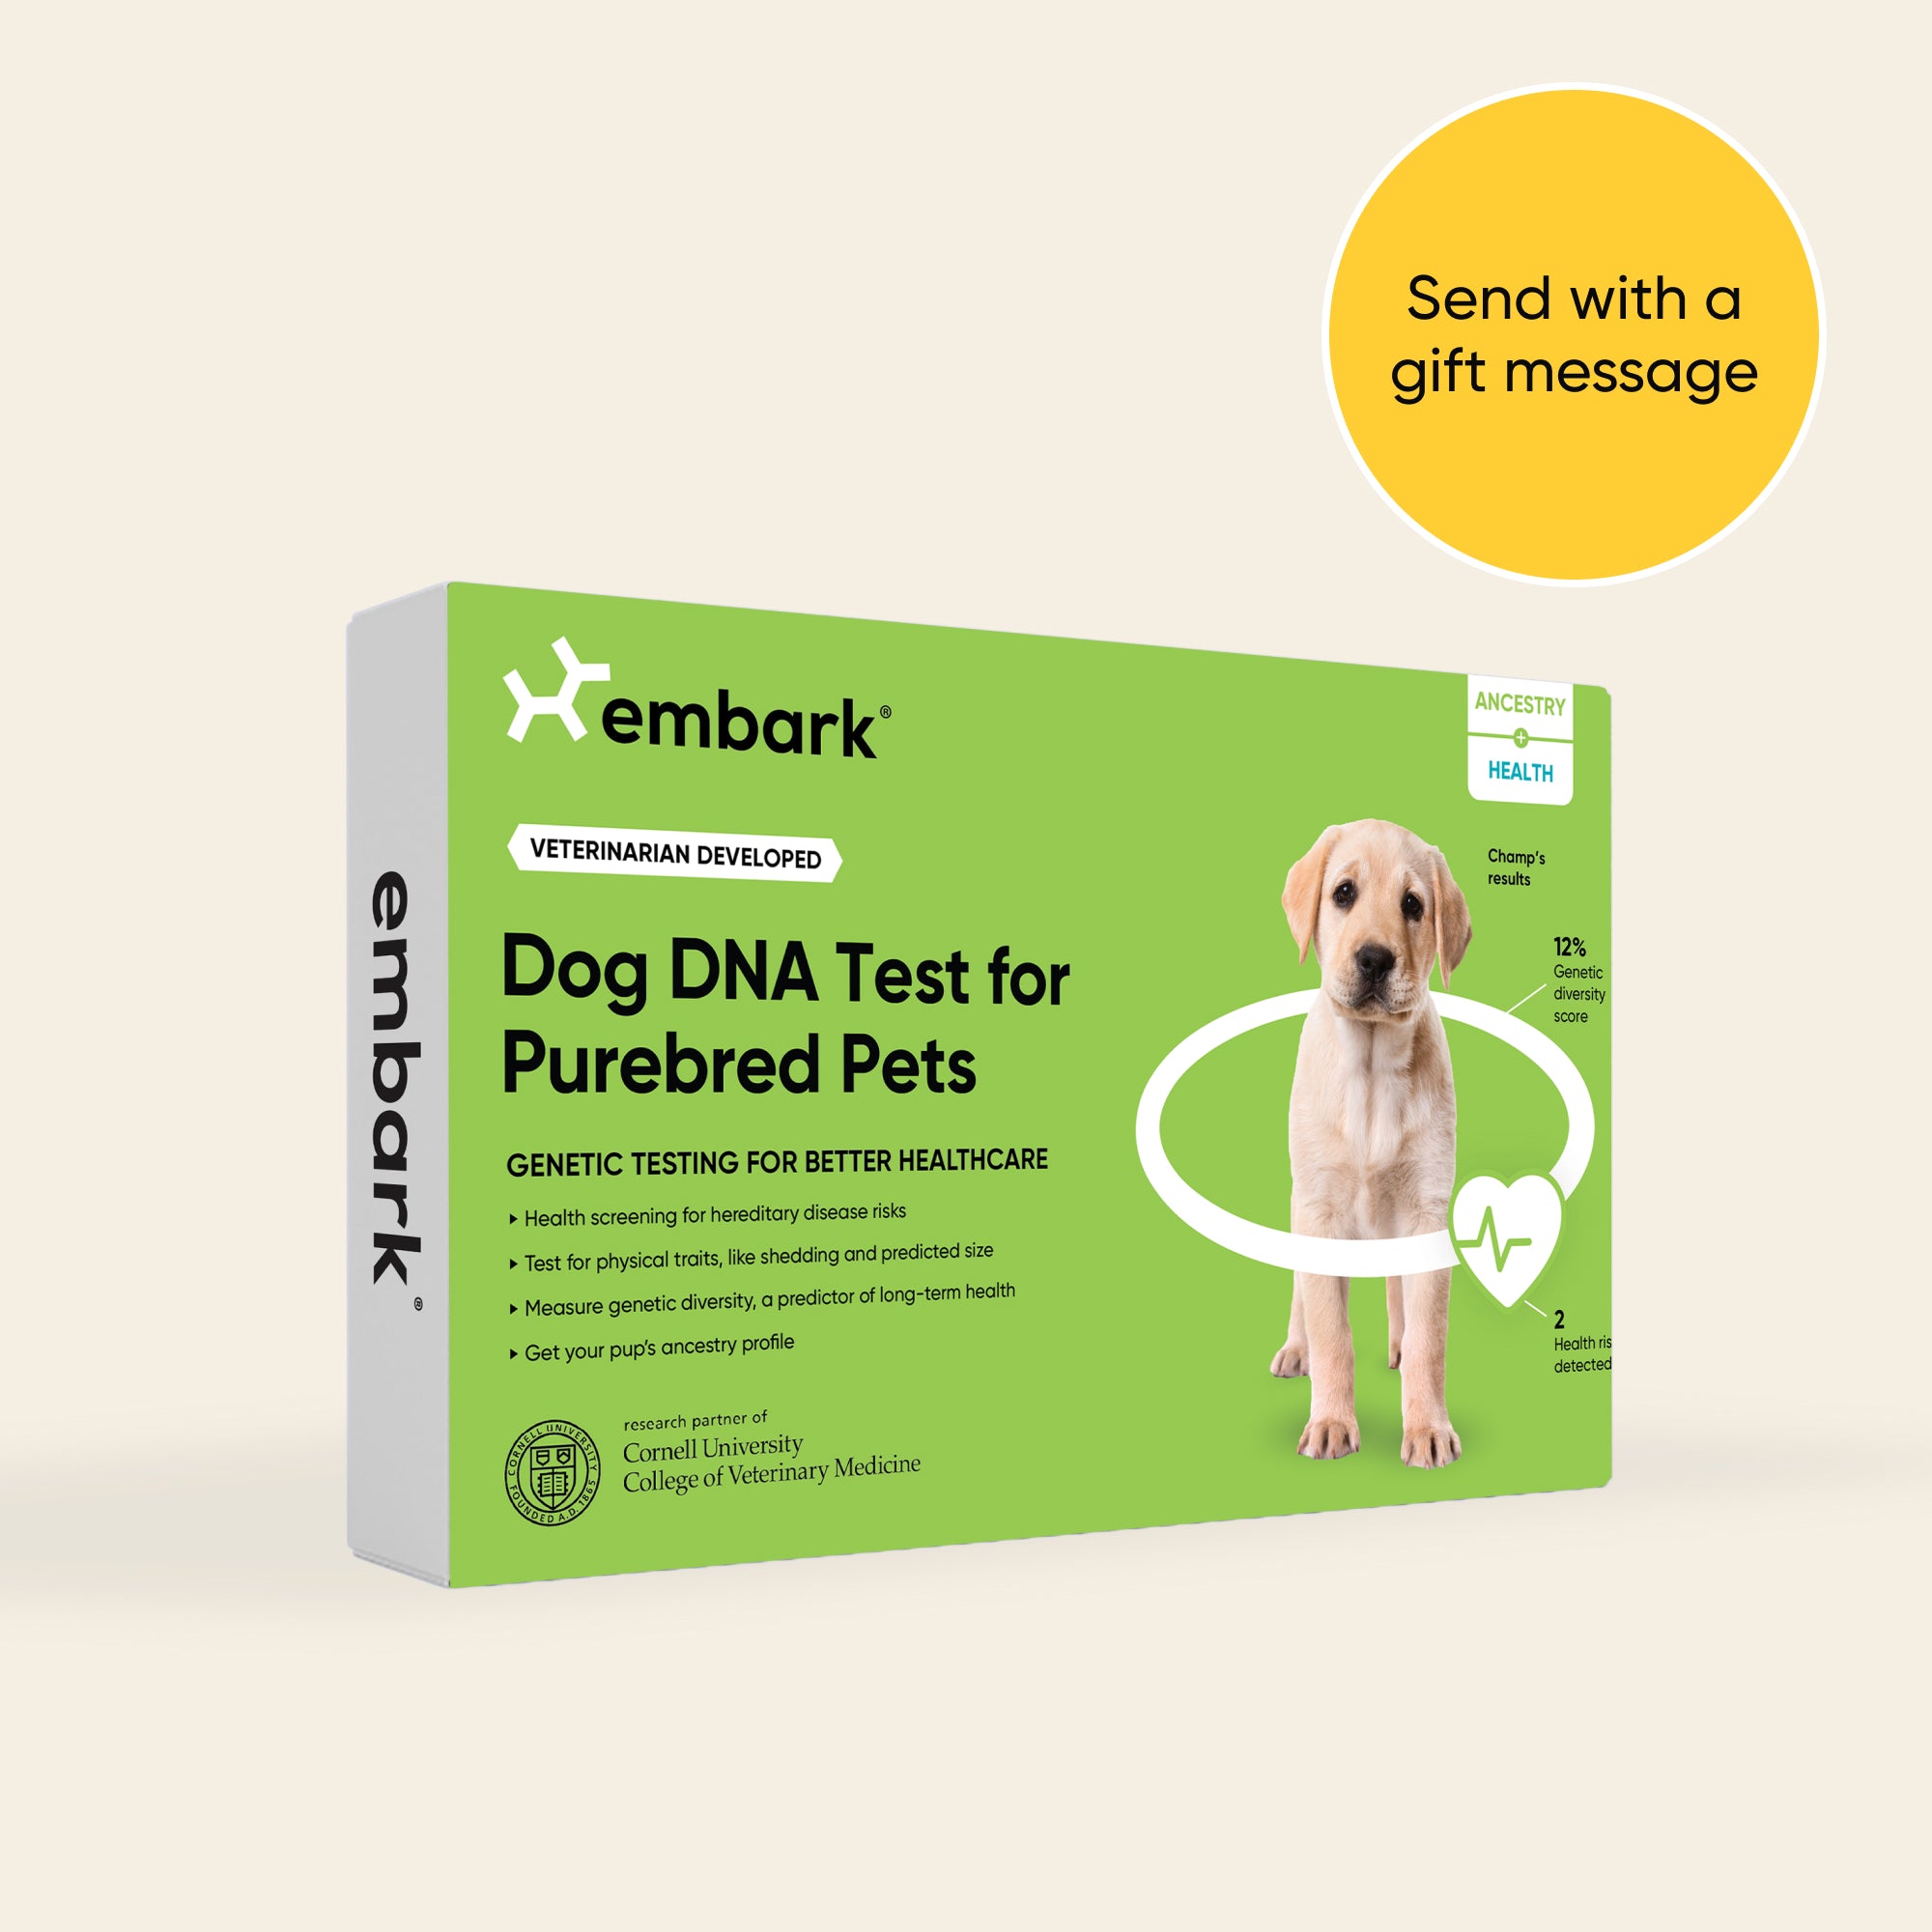 Embark Dog DNA Test: Their best life starts with Embark.